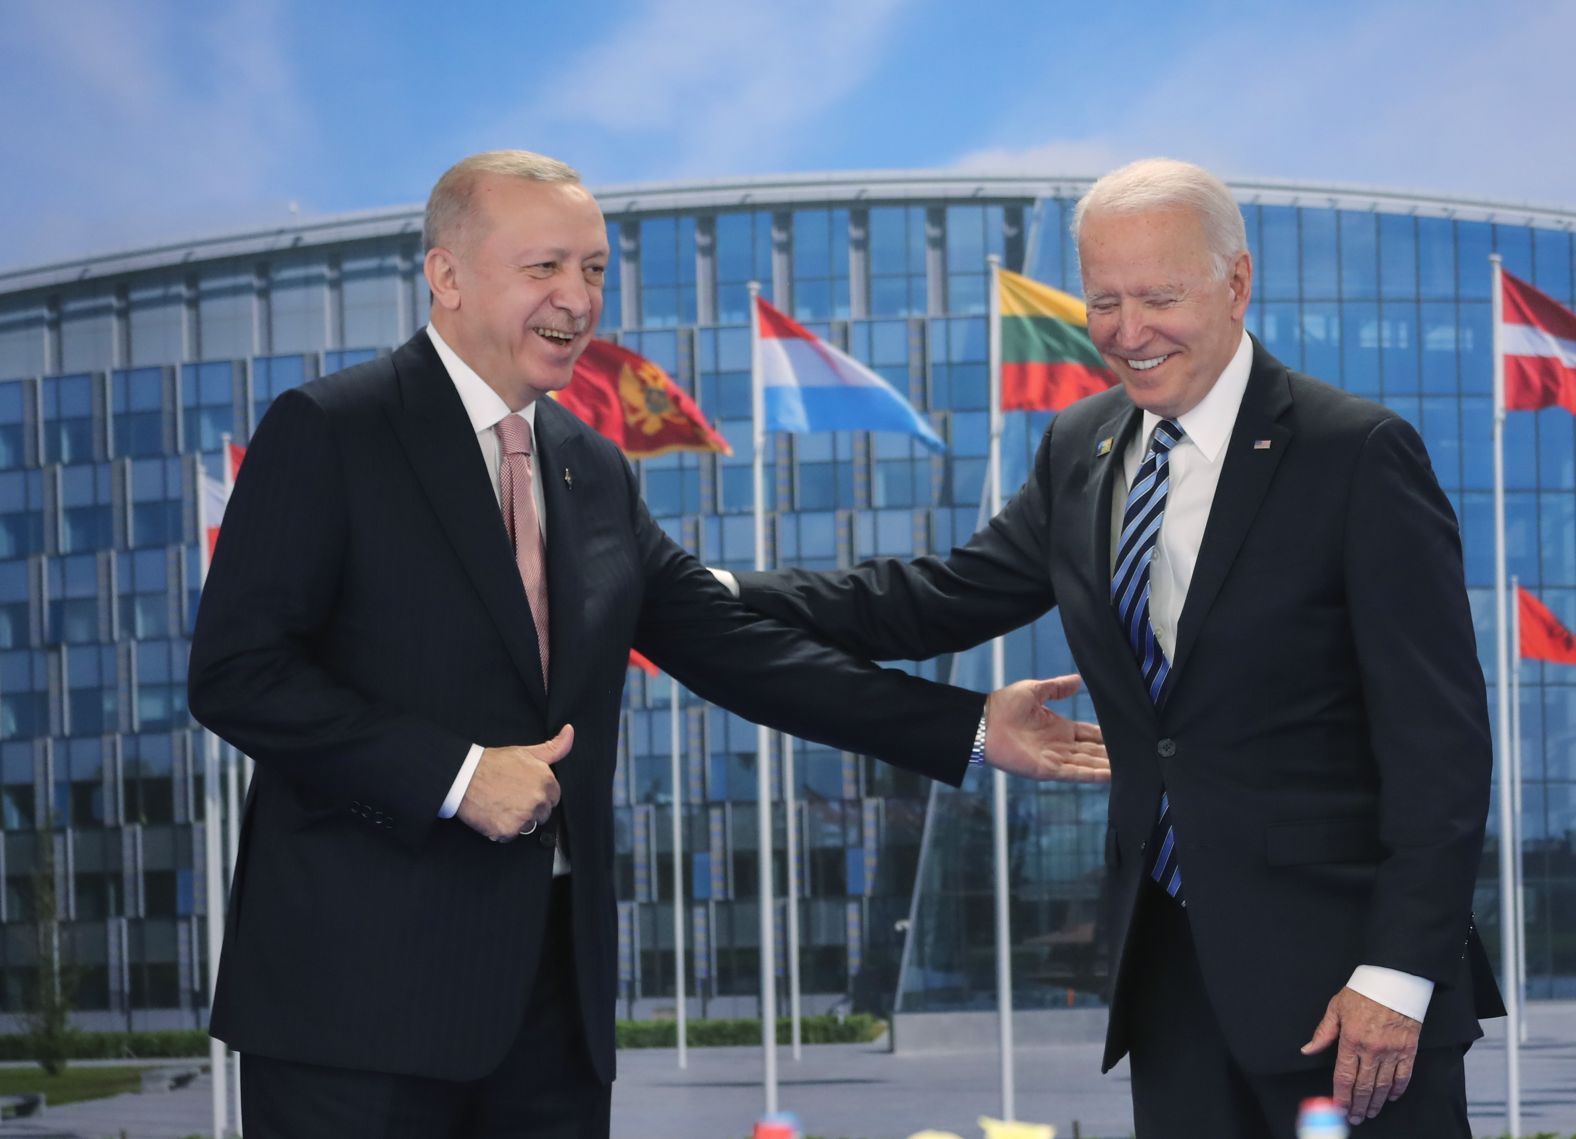 Turkish President Recep Tayyip Erdogan, left, greets Biden at the NATO summit in Brussels, Belgium, on Monday. Biden told reporters that much of <a href="index.php?page=&url=https%3A%2F%2Fwww.cnn.com%2F2021%2F06%2F14%2Fpolitics%2Frecep-tayyip-erdogan-joe-biden-bilateral%2Findex.html" target="_blank">his meeting with Erdogan</a> was one-on-one, and he said the interactions were "positive and productive."